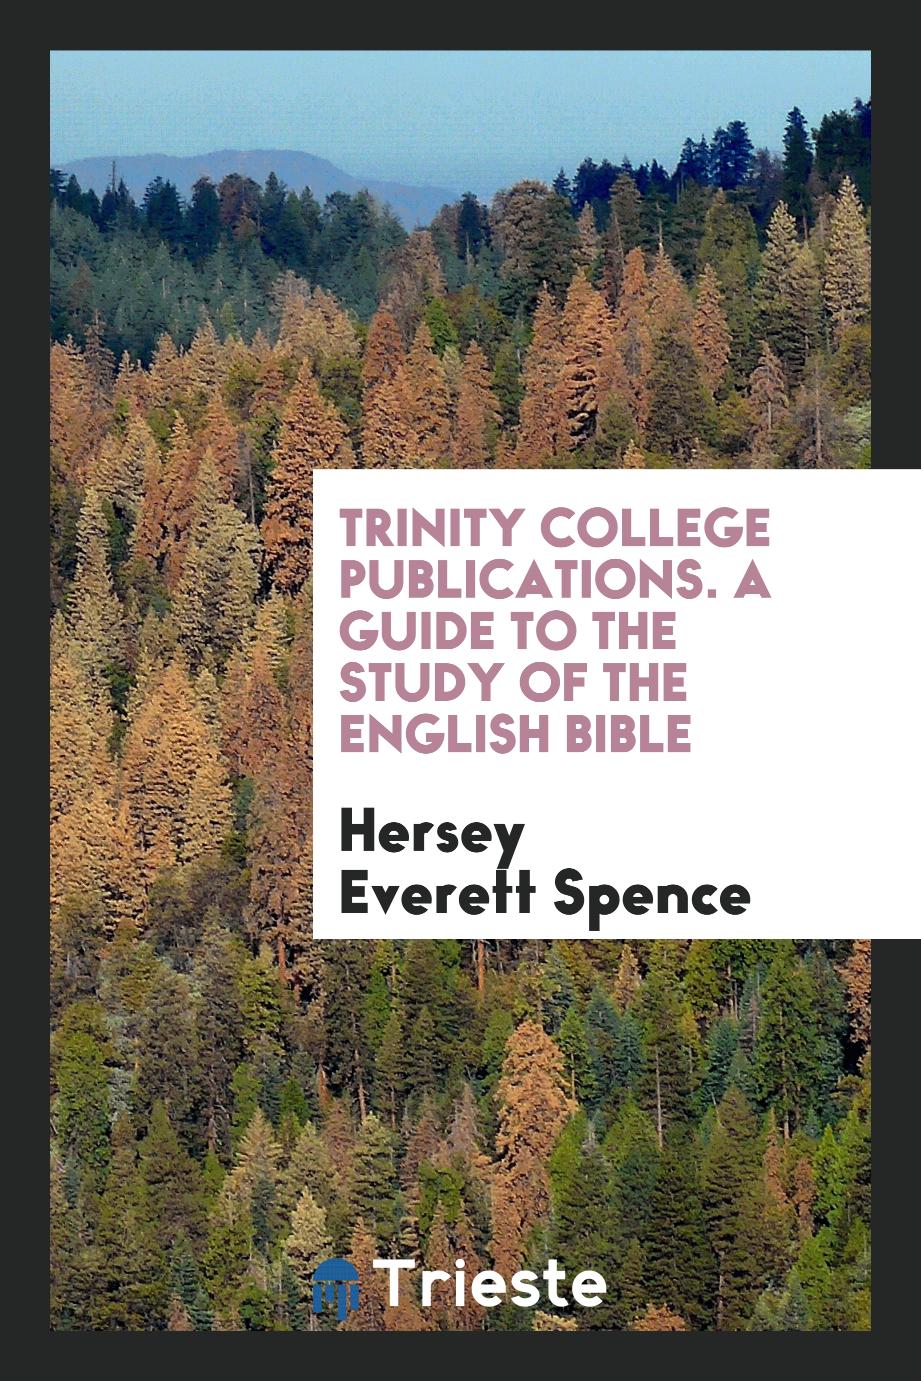 Trinity College Publications. A Guide to the Study of the English Bible